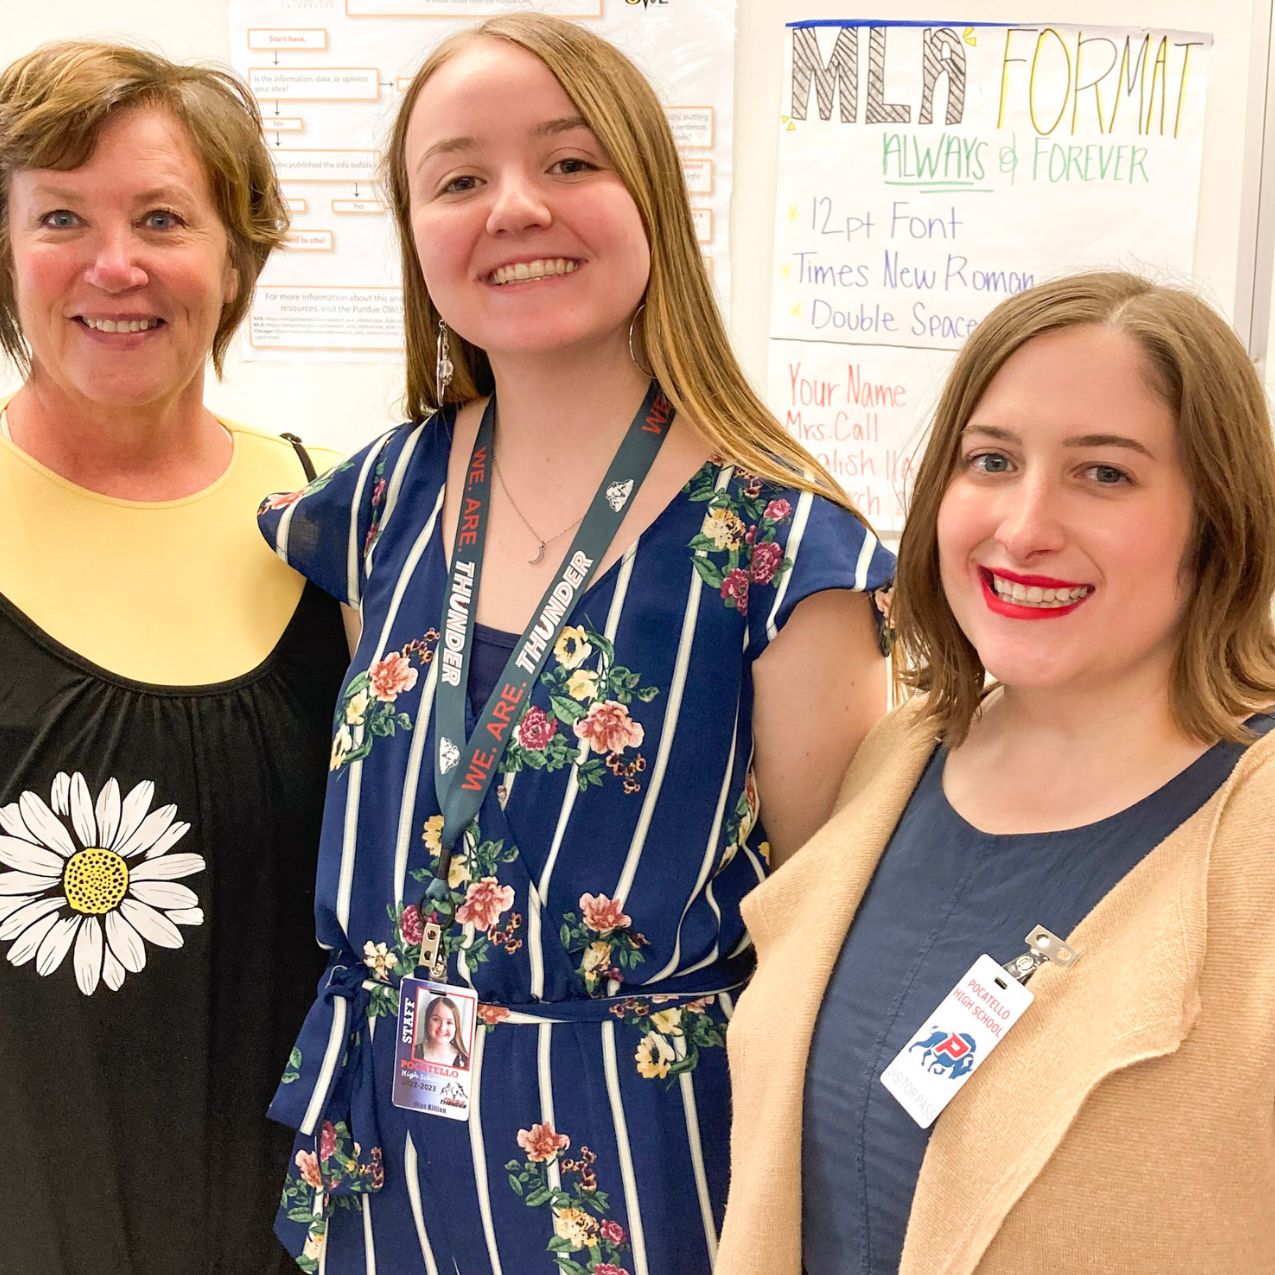 Three teachers stand together smiling for a photo. They are a high school teacher at Pocatello High School, a student teacher from the ISU program, and a professor of history at ISU